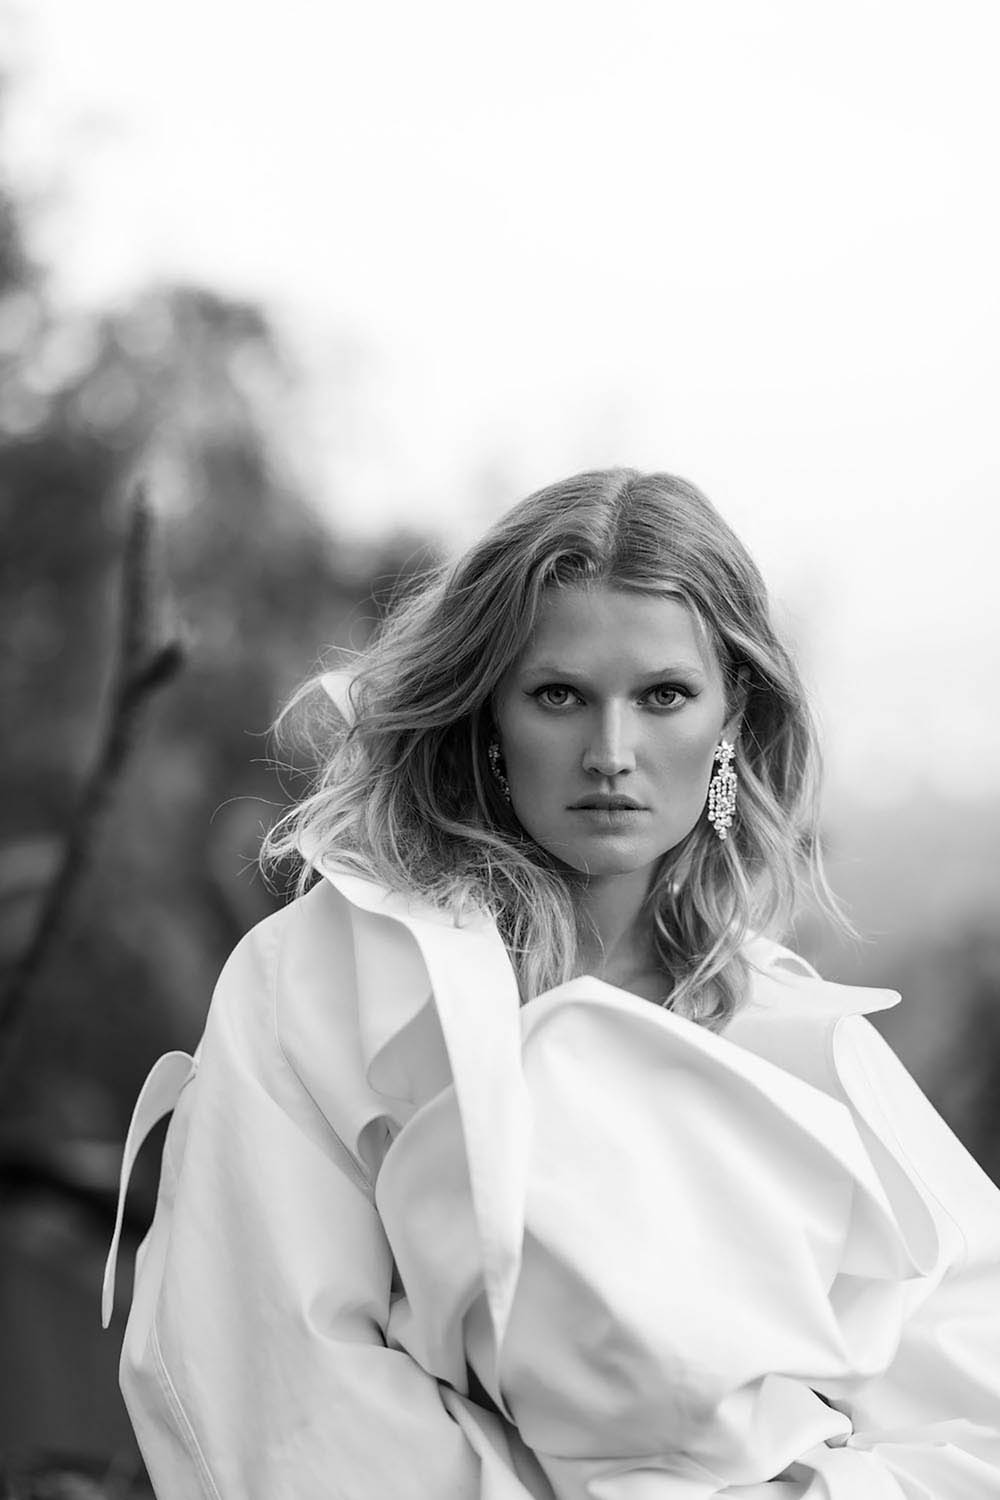 Toni Garrn covers Editorialist Spring Summer 2018 by Gilles Bensimon